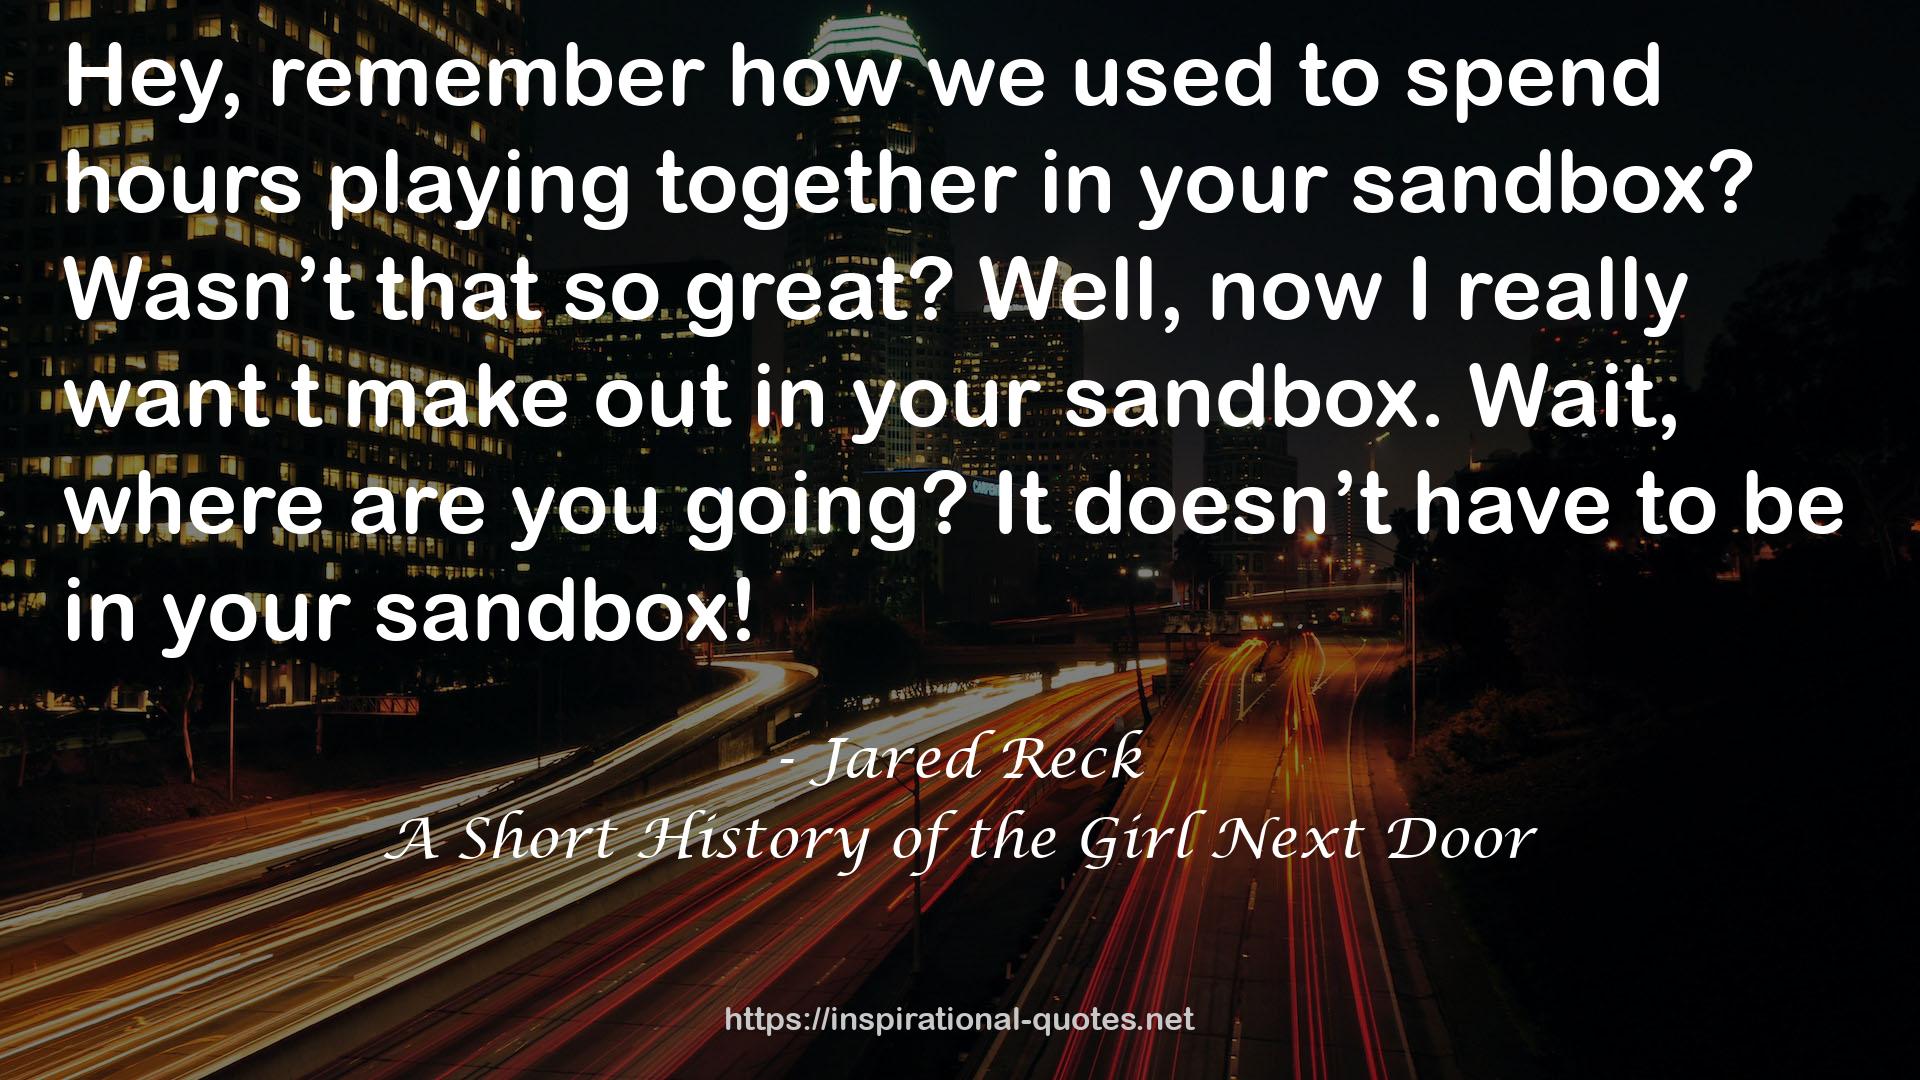 A Short History of the Girl Next Door QUOTES